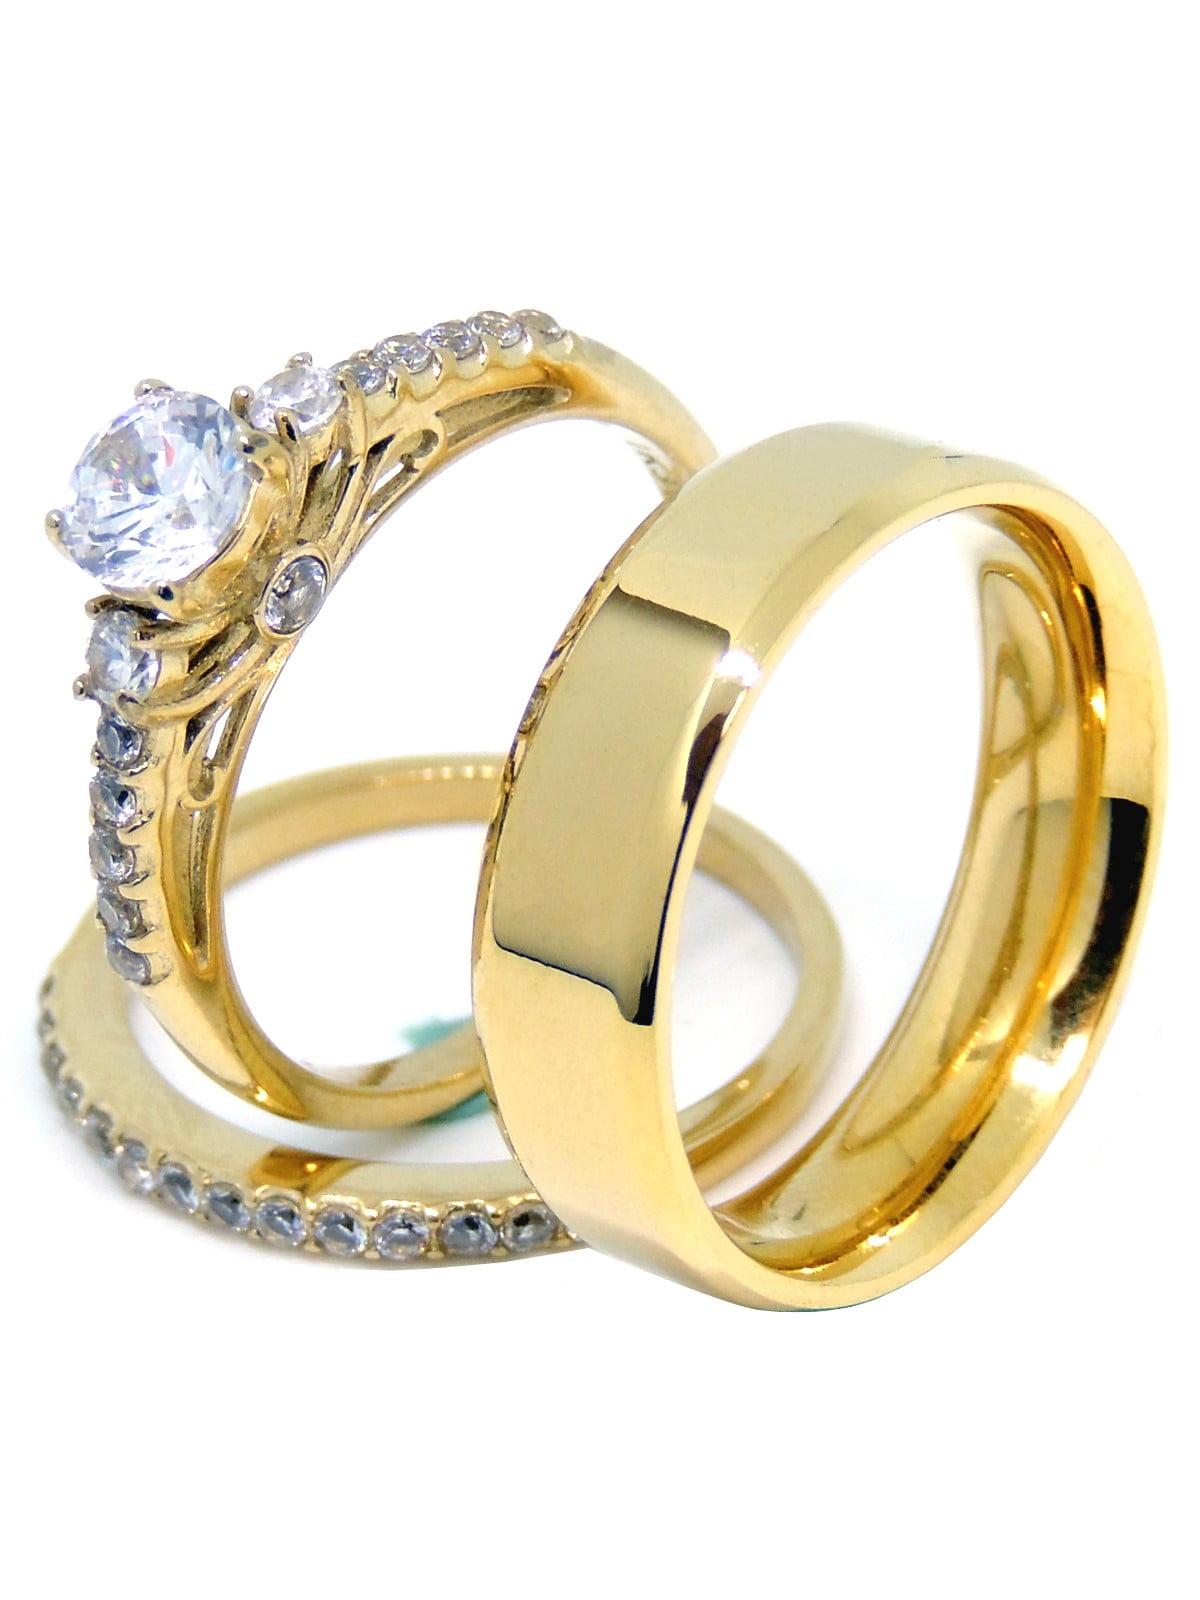 wedding ring set Two Rings His Hers Couples Rings Women's 10k Yellow Gold Filled White CZ Wedding Engagement Ring Bridal Sets & Men's Stainless Steel Wedding Band 